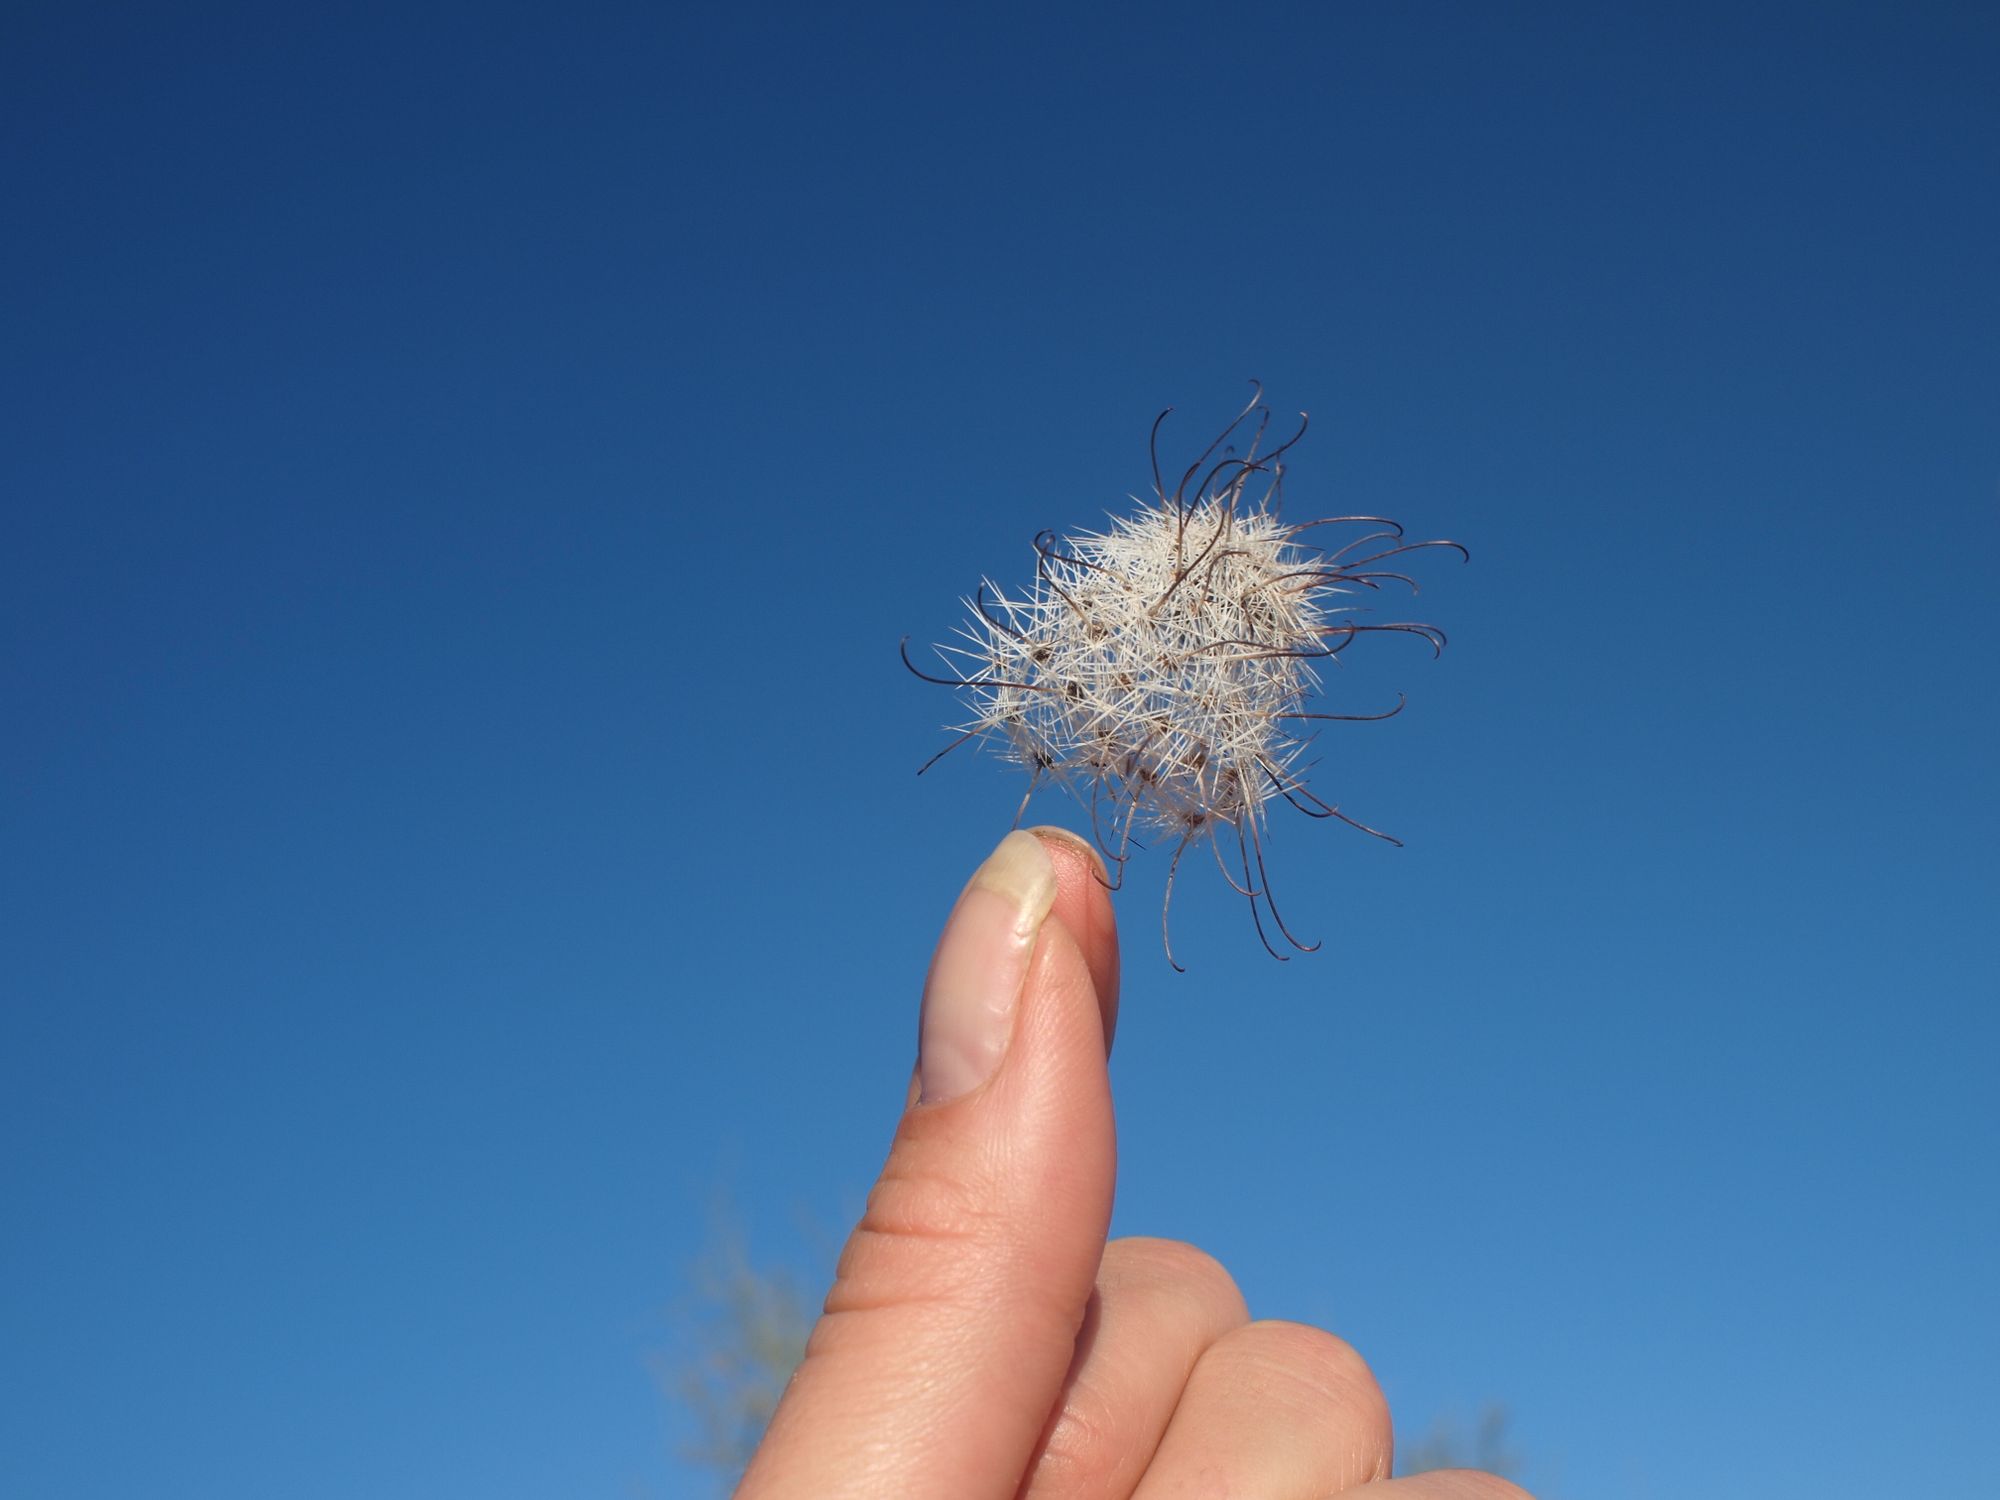 A hand holding a small ball of cactus thorns to the sky